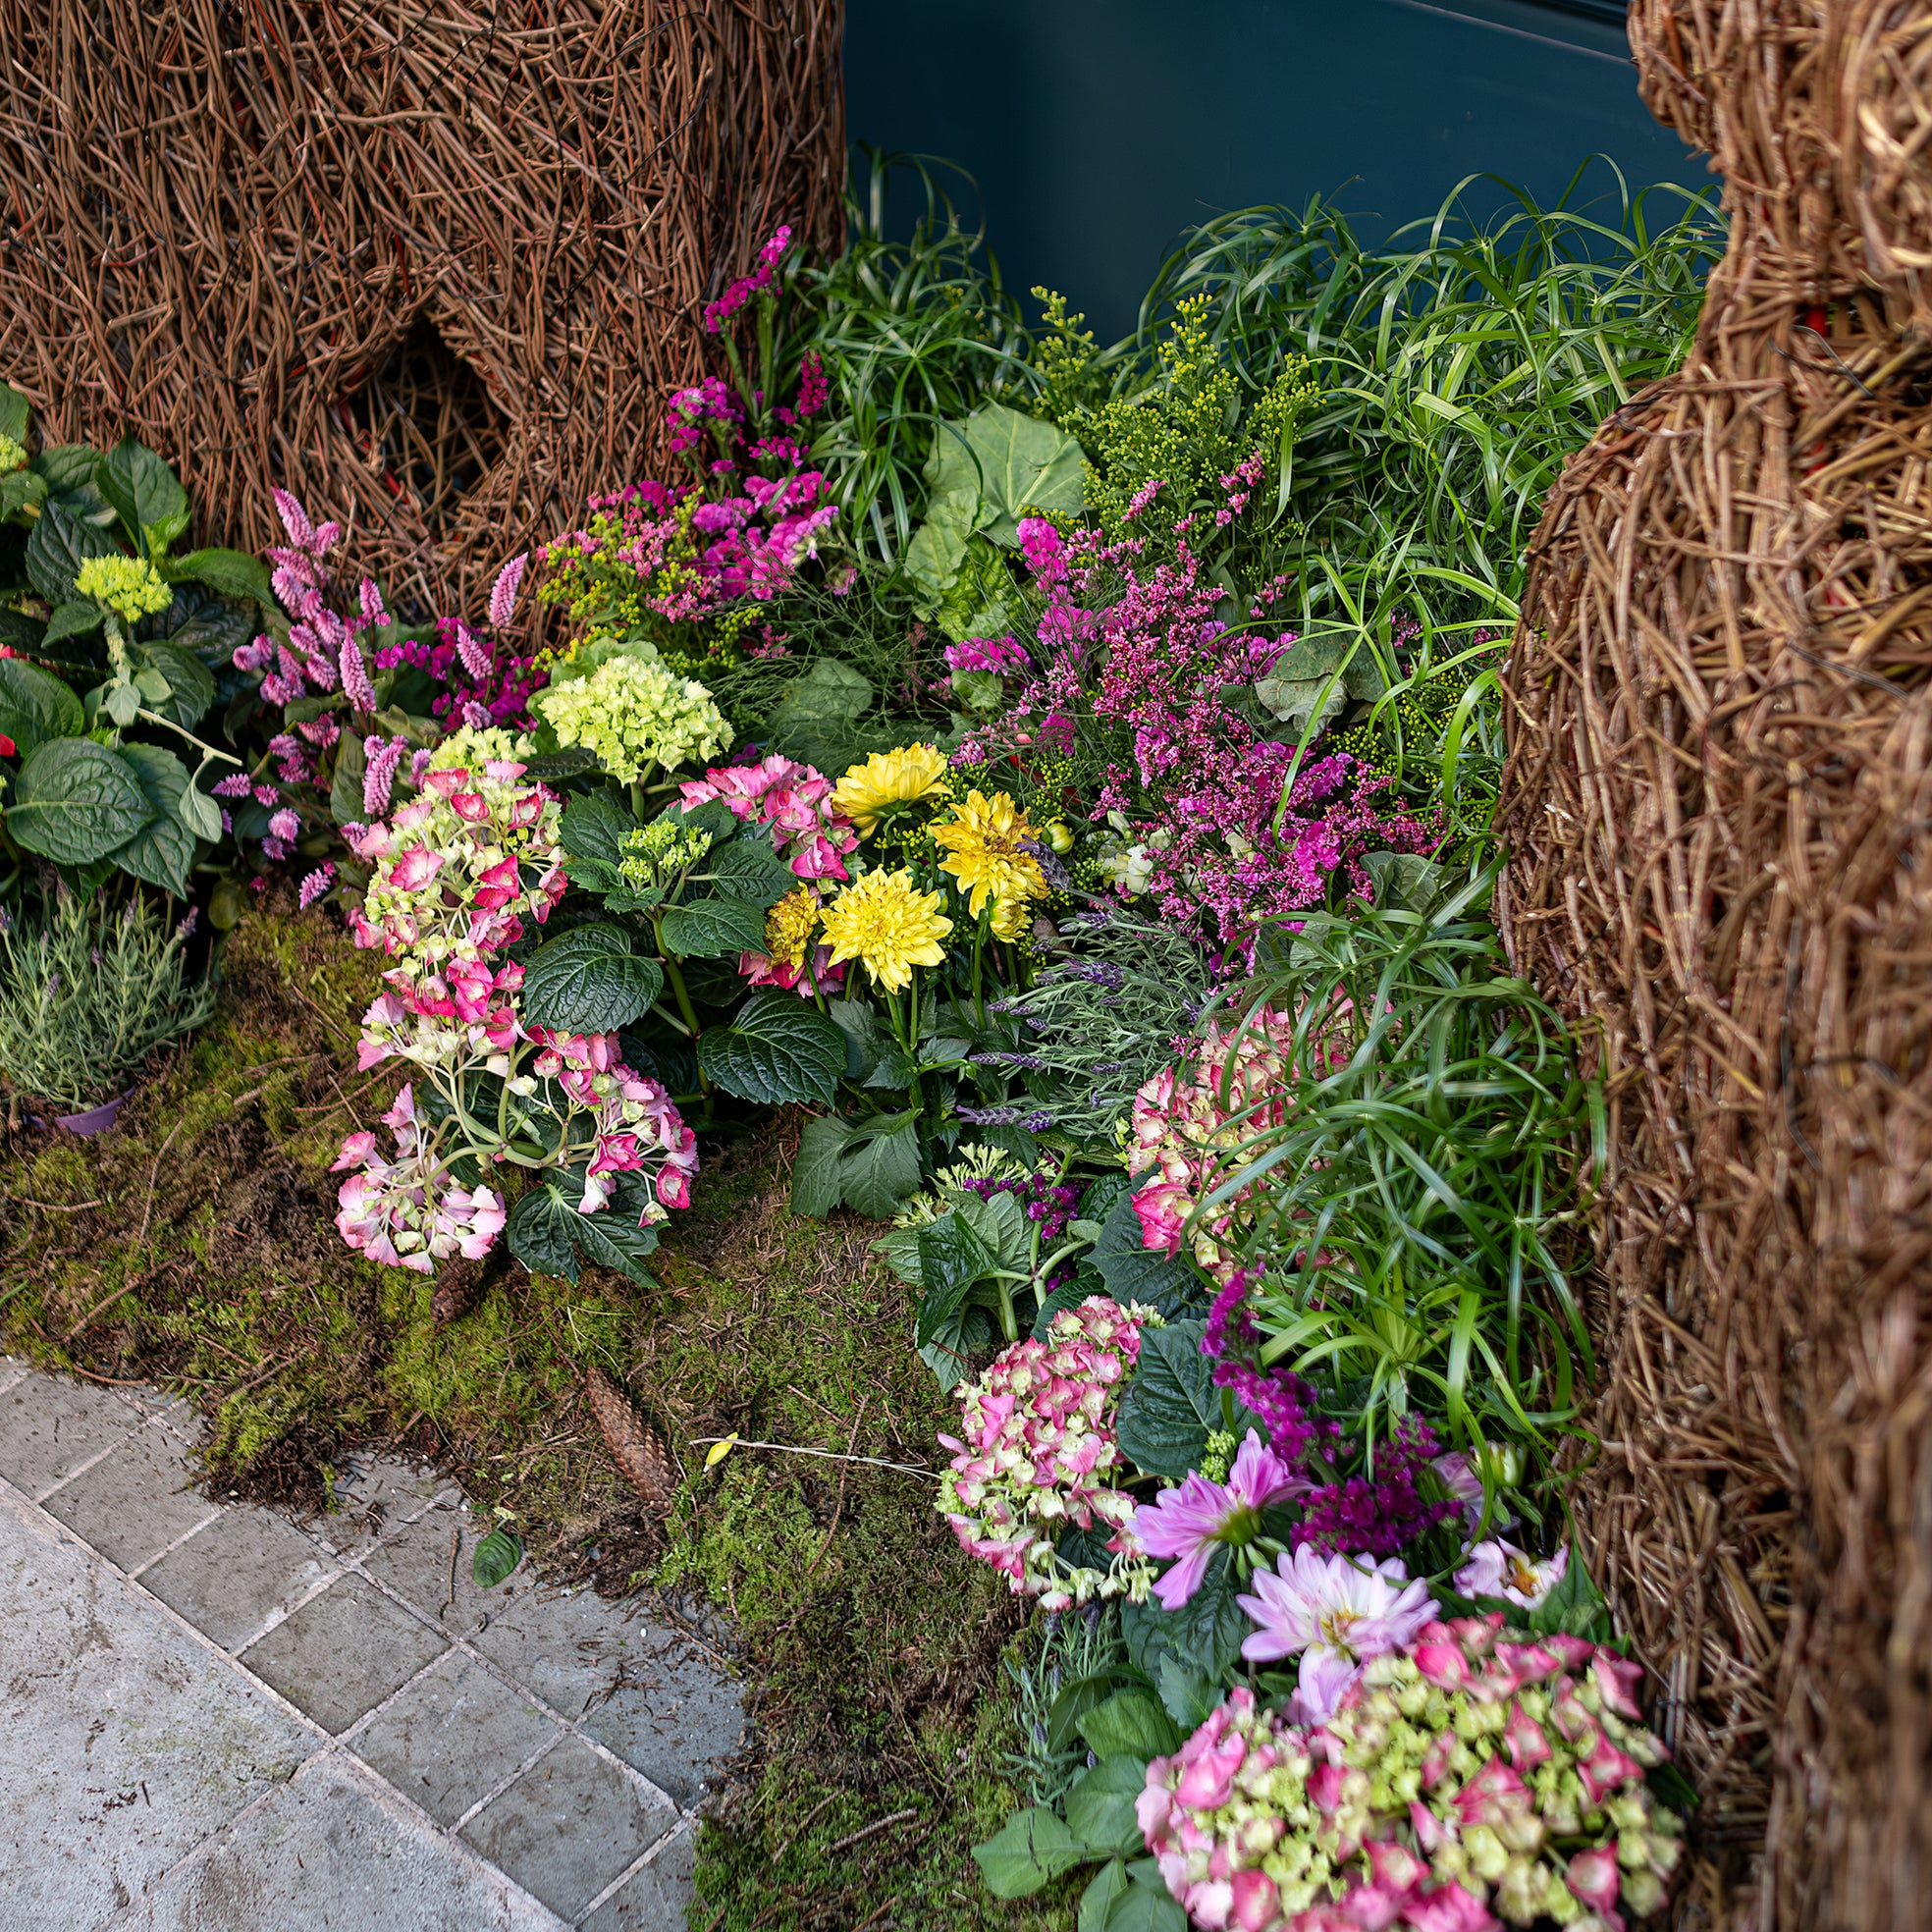 A colourful floral arrangement by Amaranté London for Chelsea in Bloom features pink and yellow flowers, lush green plants, and wicker elements, creating a captivating garden display.